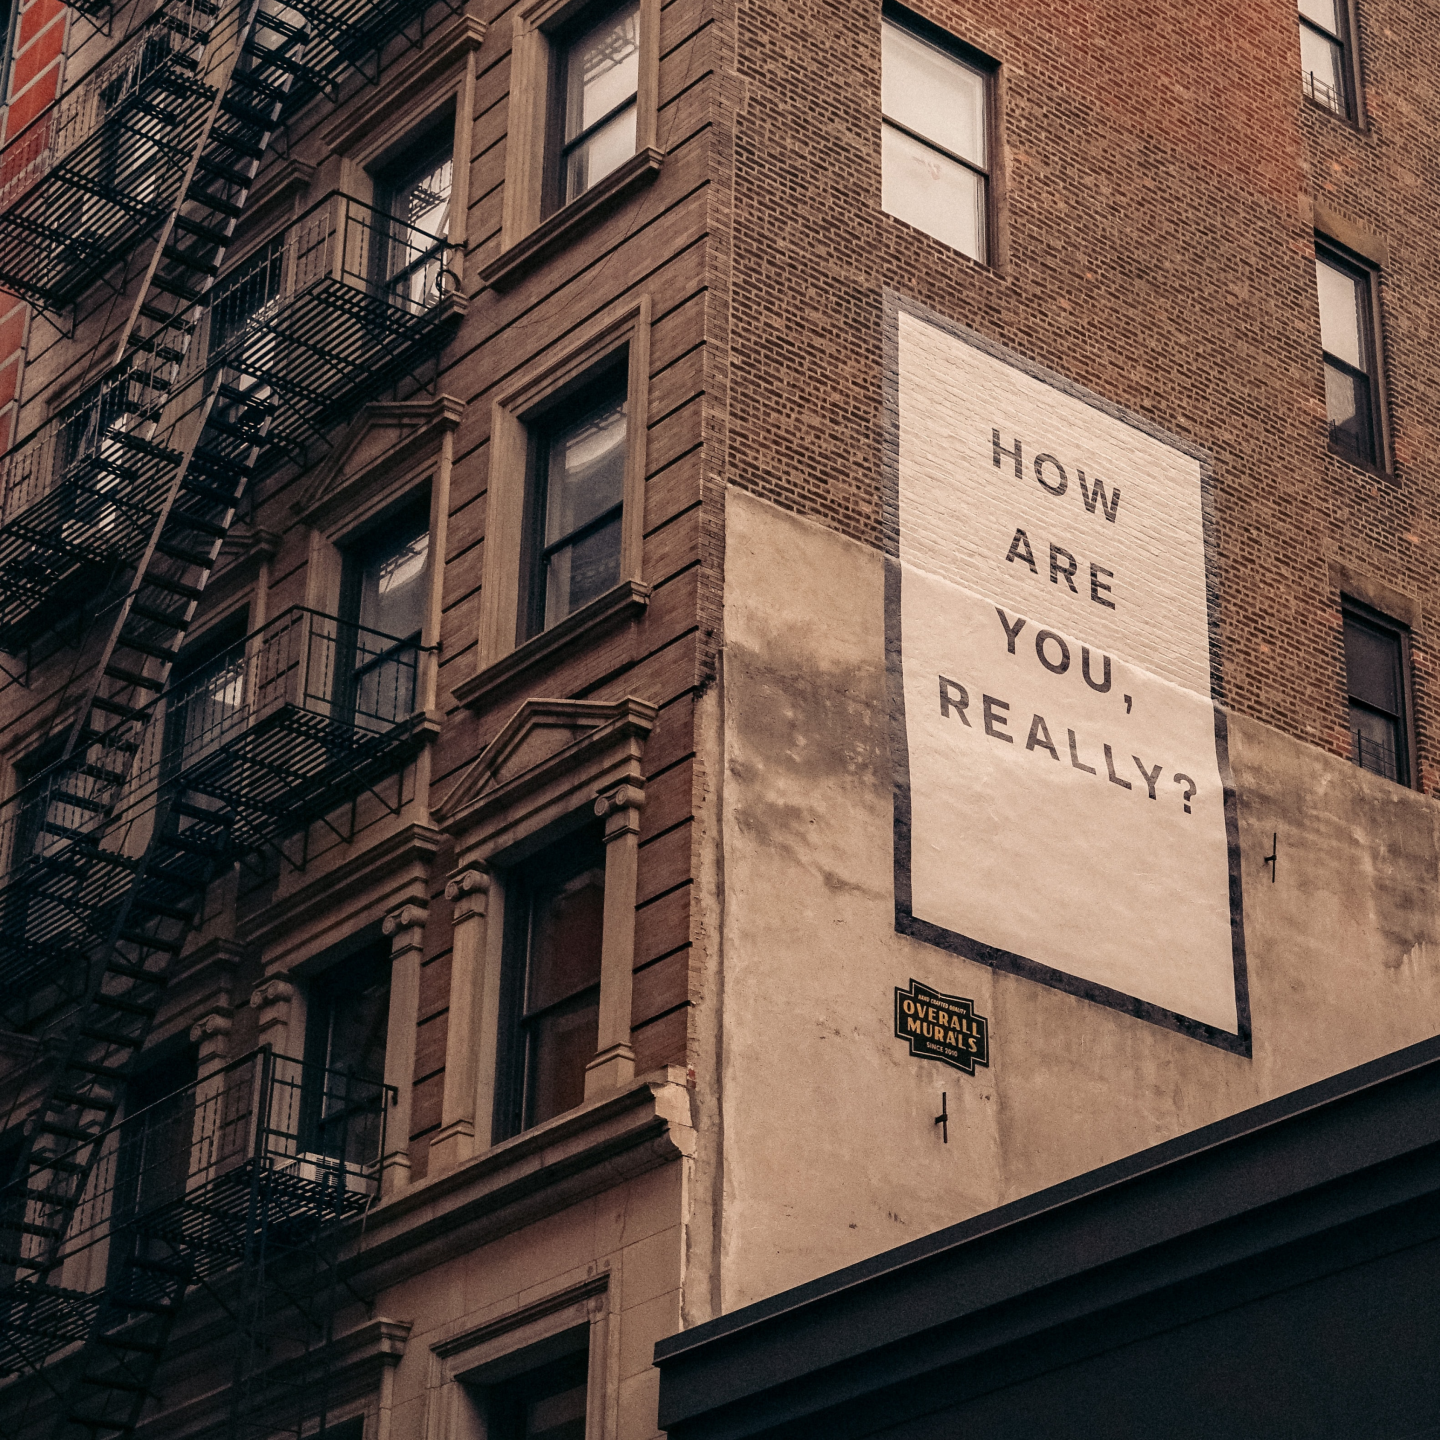 'How are you really?' sign on side of a building